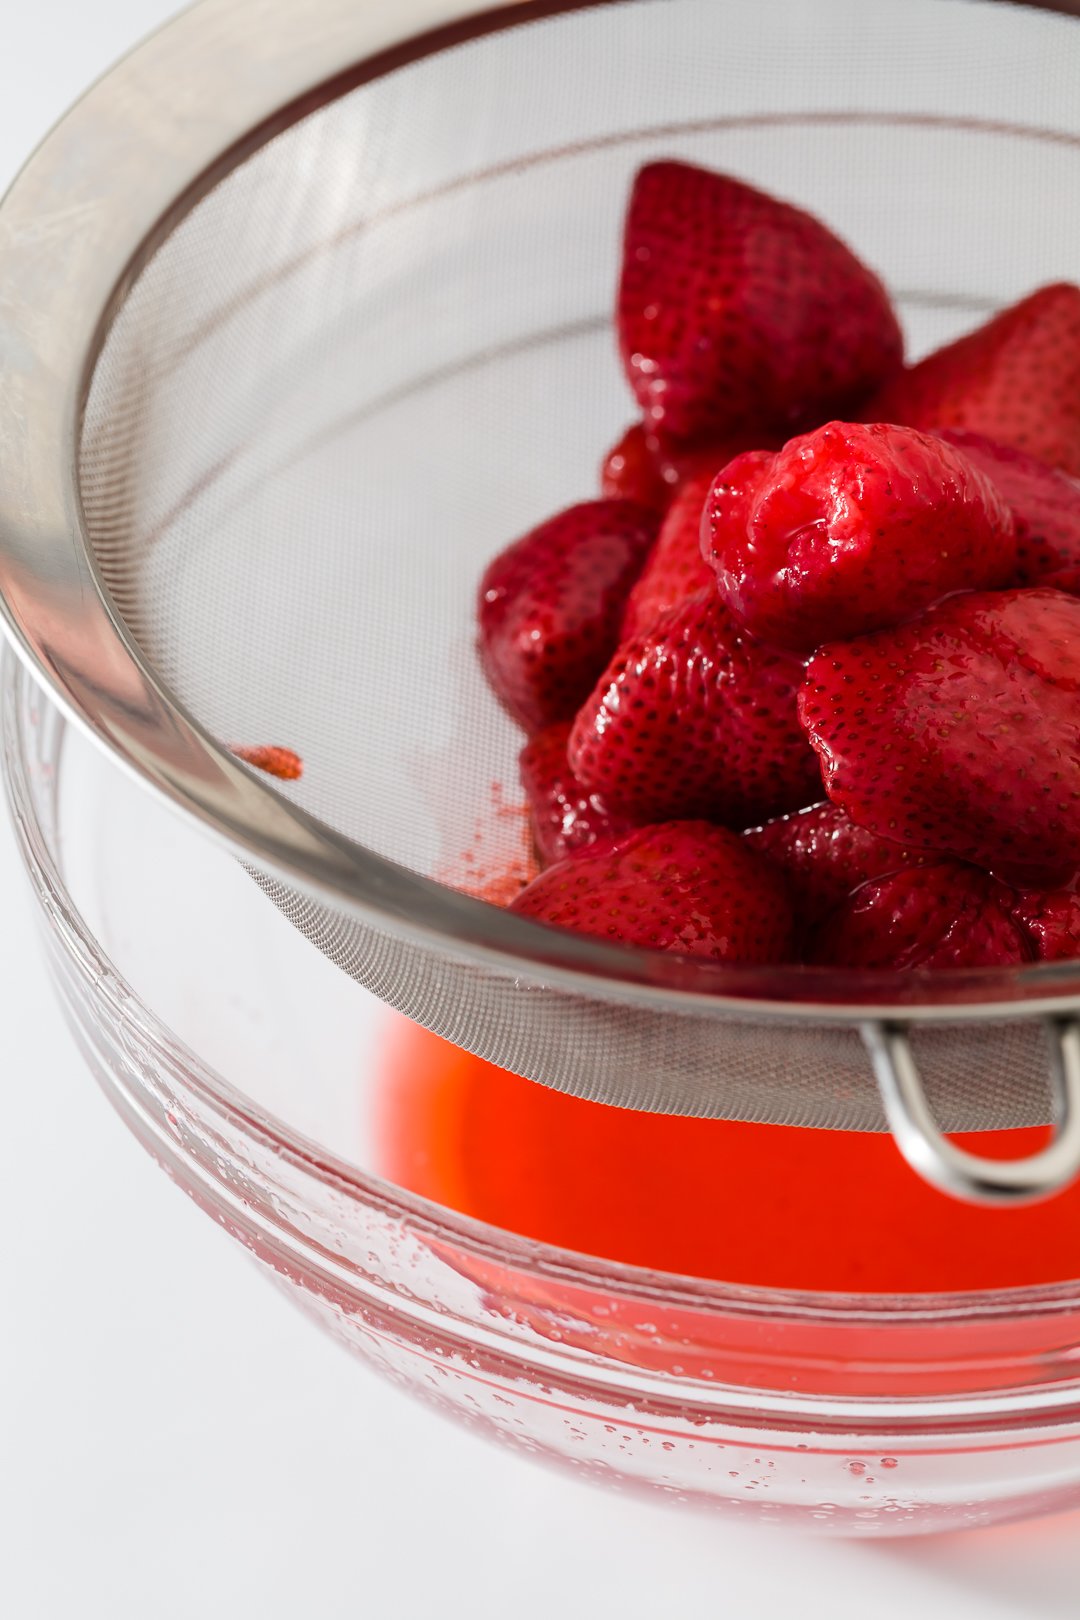 strawberry juice being strained off of strawberries using a sieve